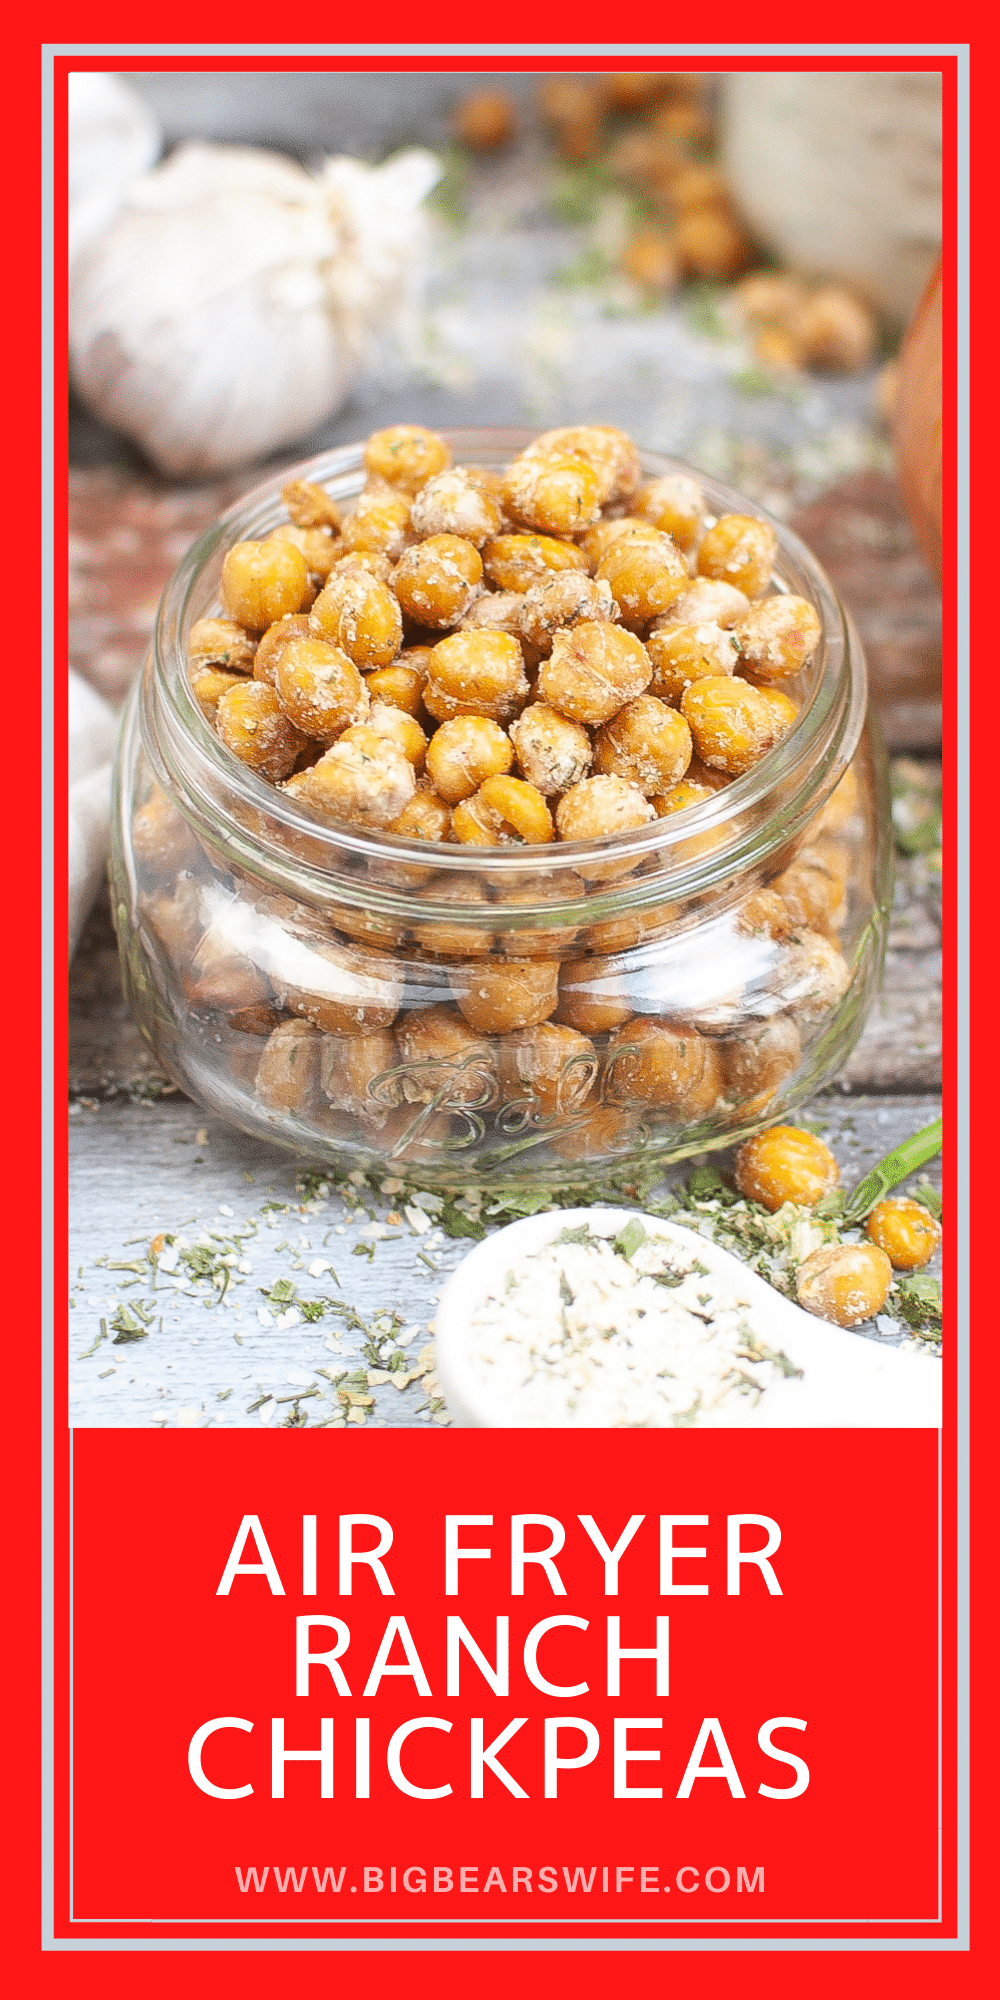 These crispy Air Fryer Ranch Chickpeas are a great snack and super easy to make! Air Fryer Chickpeas with a homemade ranch seasoning!  via @bigbearswife